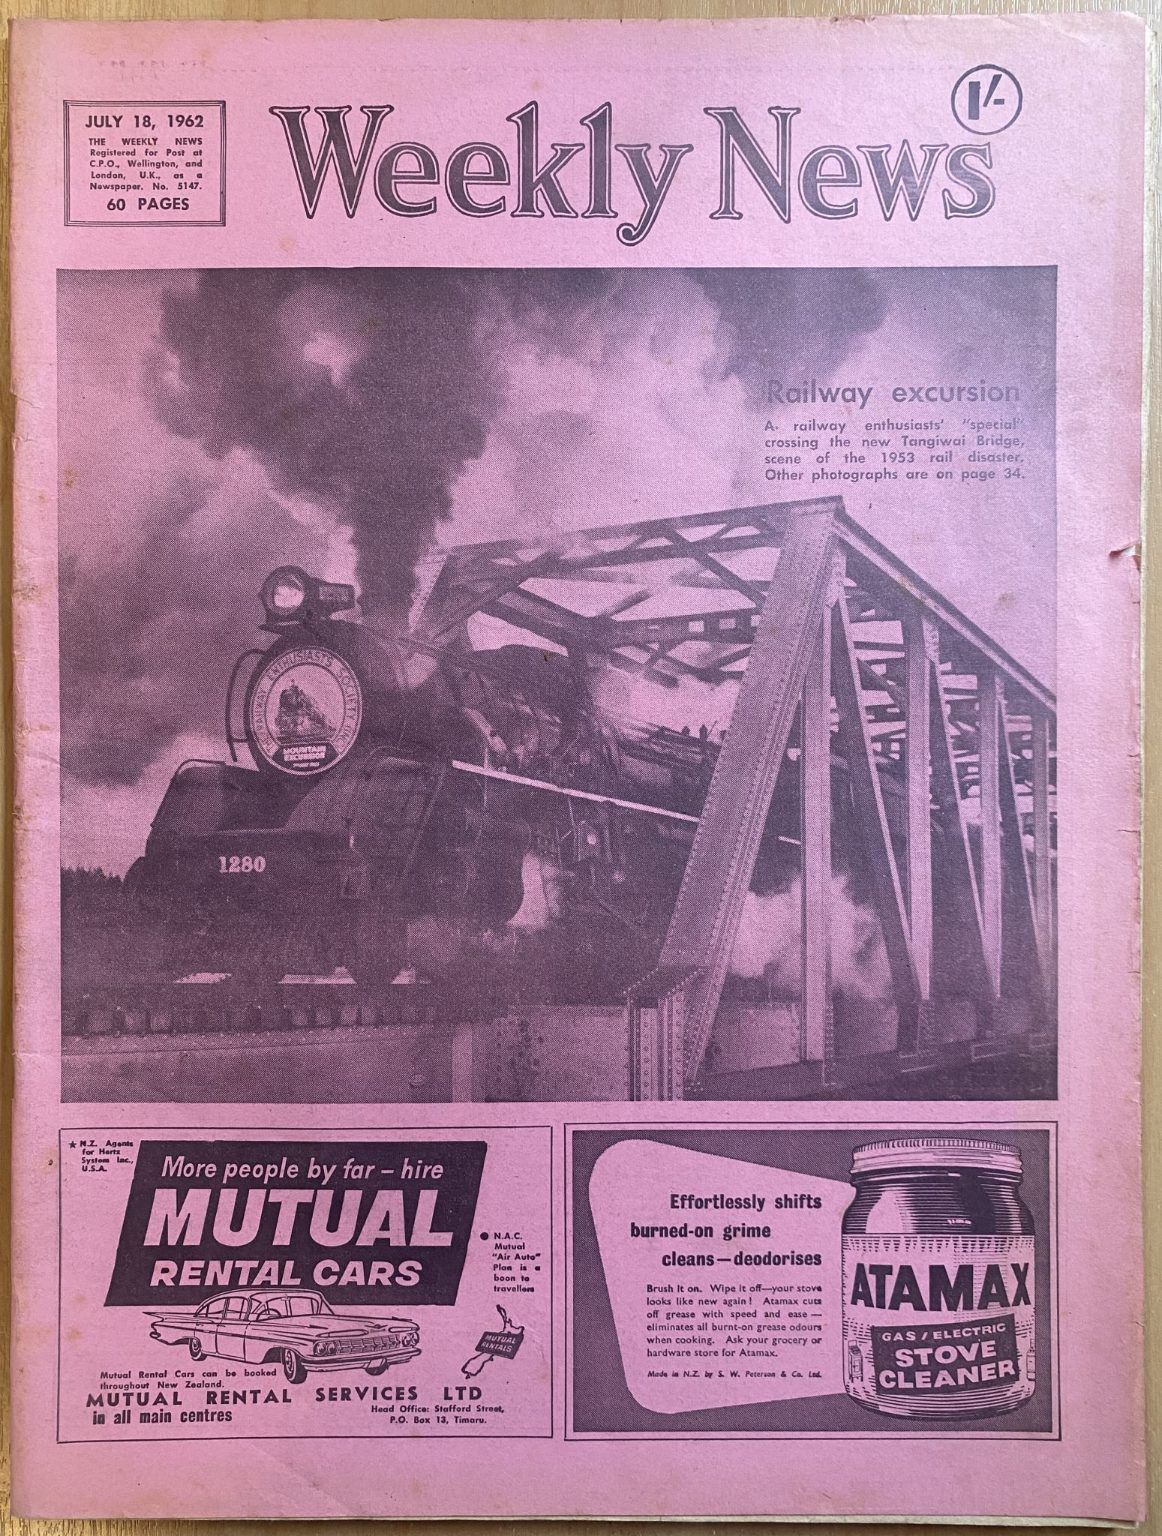 OLD NEWSPAPER: The Weekly News, No. 5147, 18 July 1962